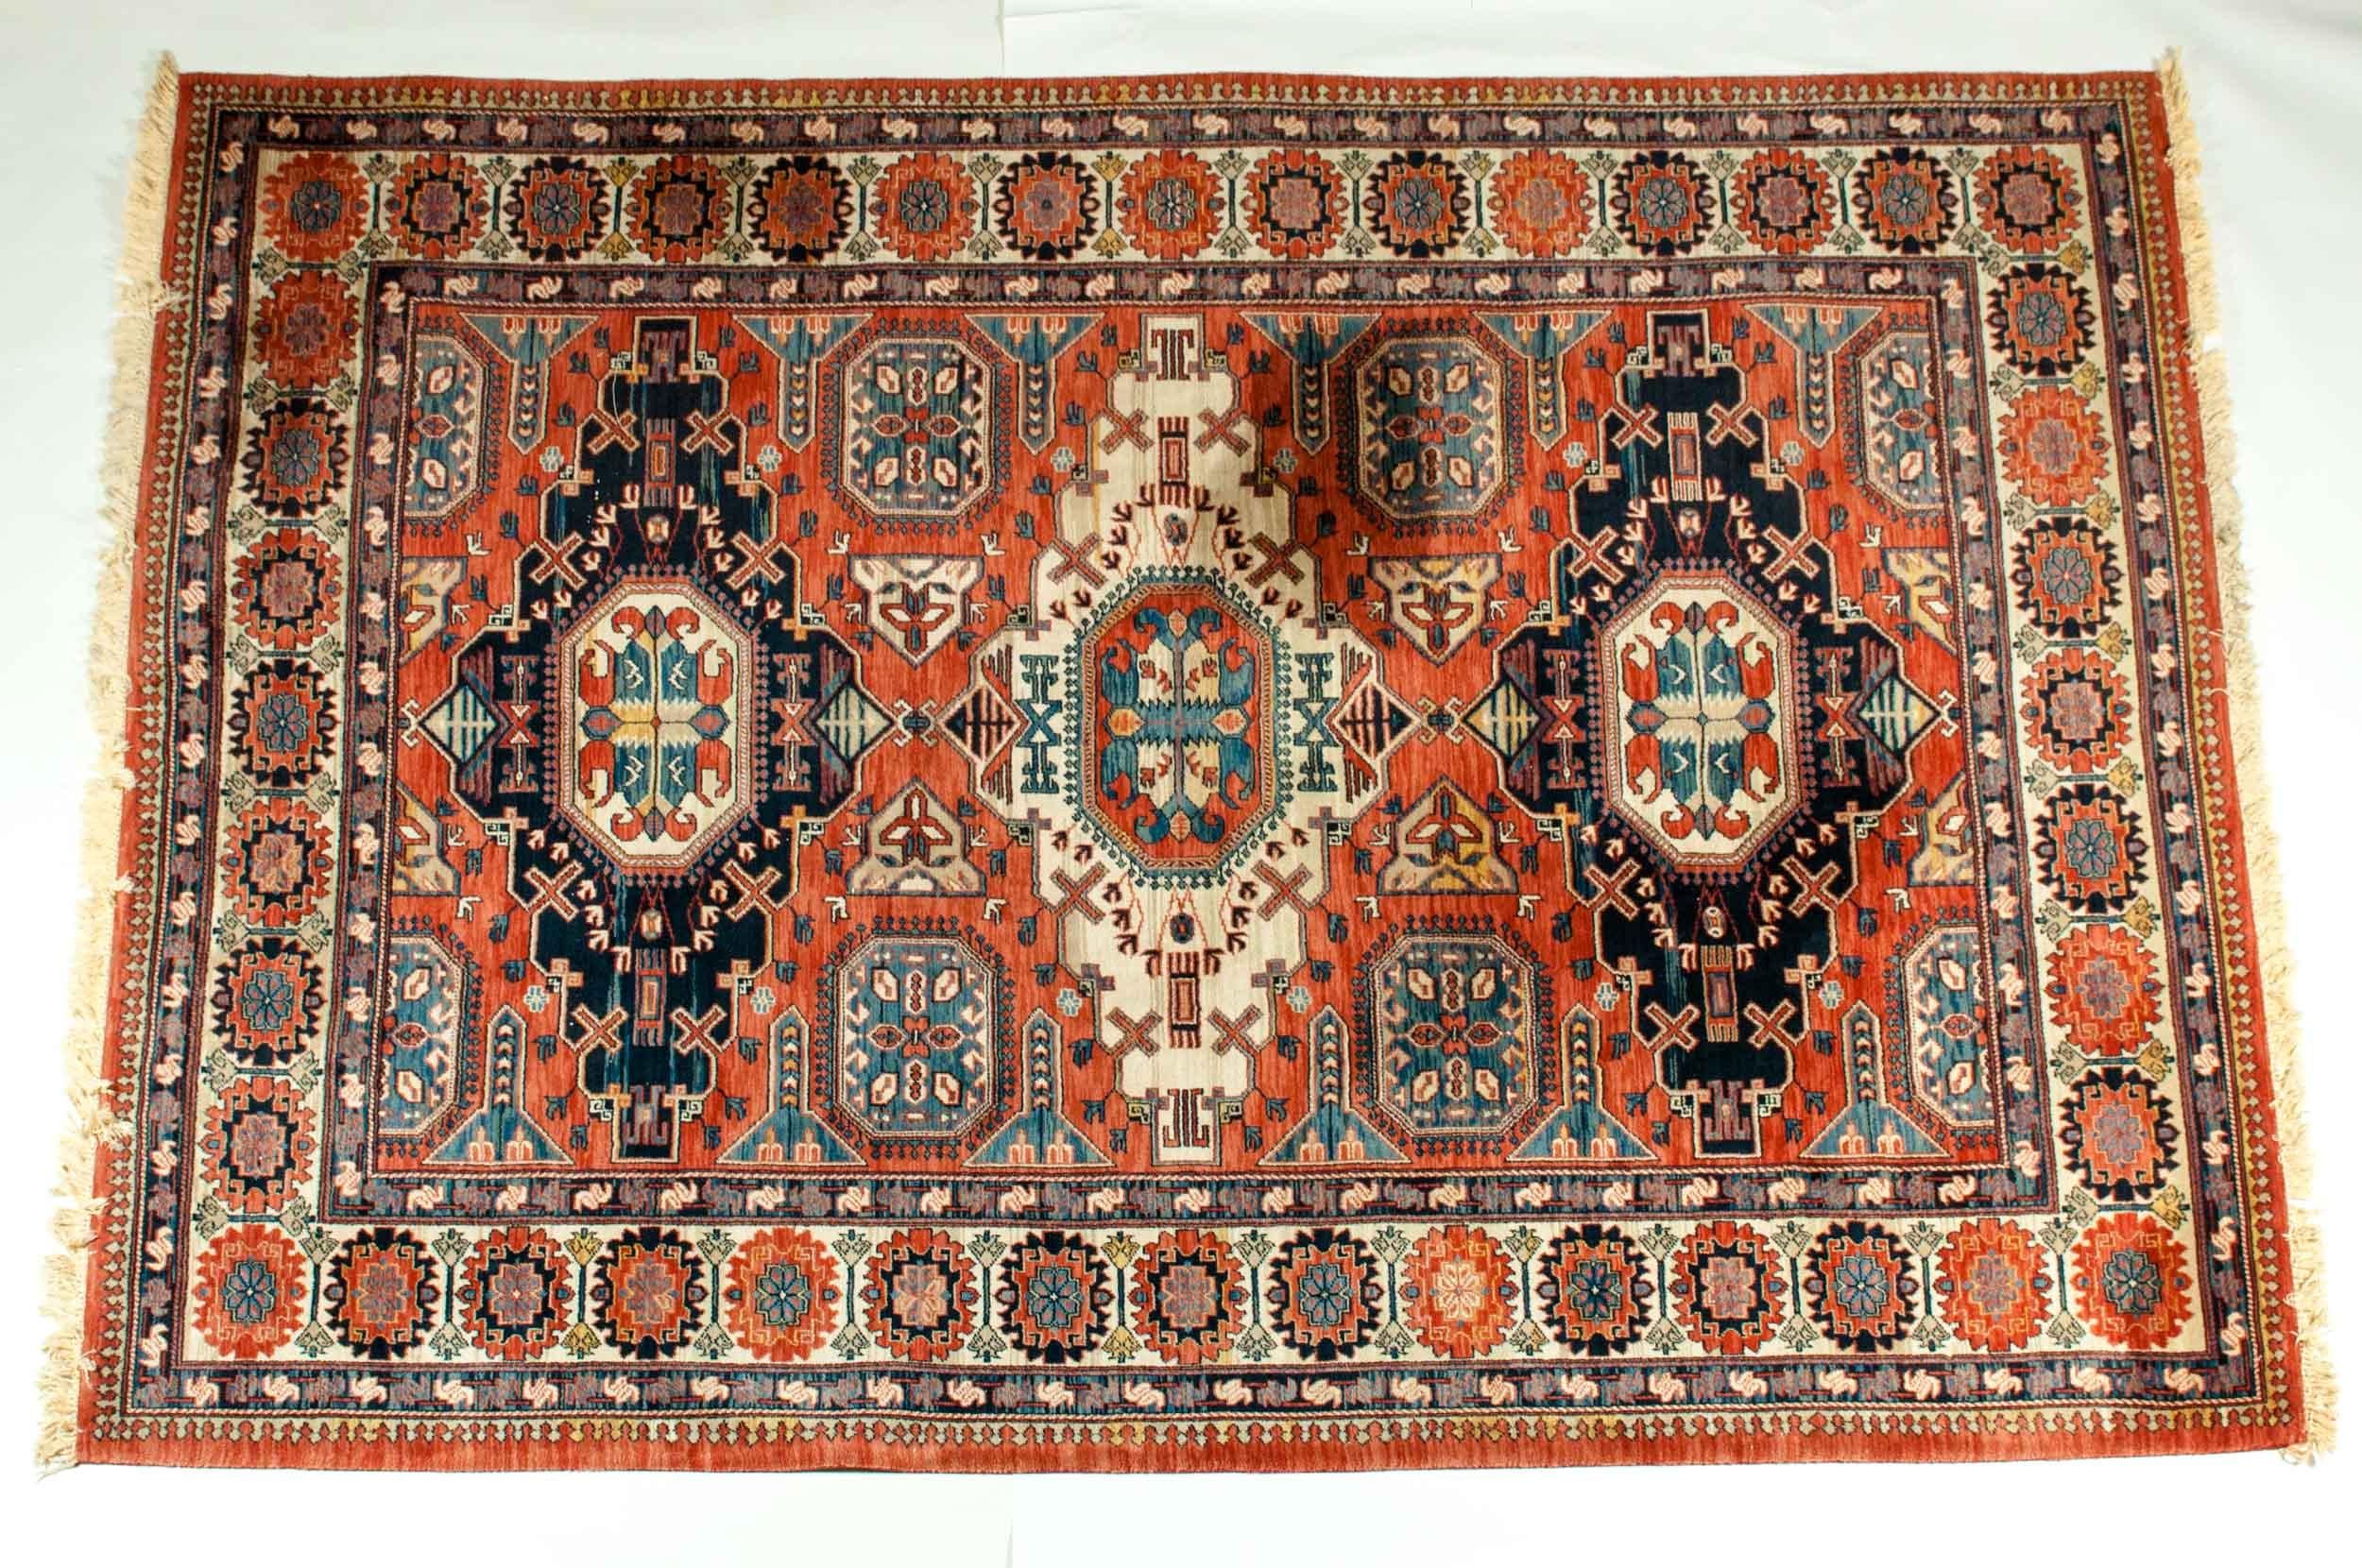 Mid-20th century large Belgium hand knotted wool area rug. The area rug is in excellent vintage condition and very clean. The rug measure about 146 inches length x 107 inches width.